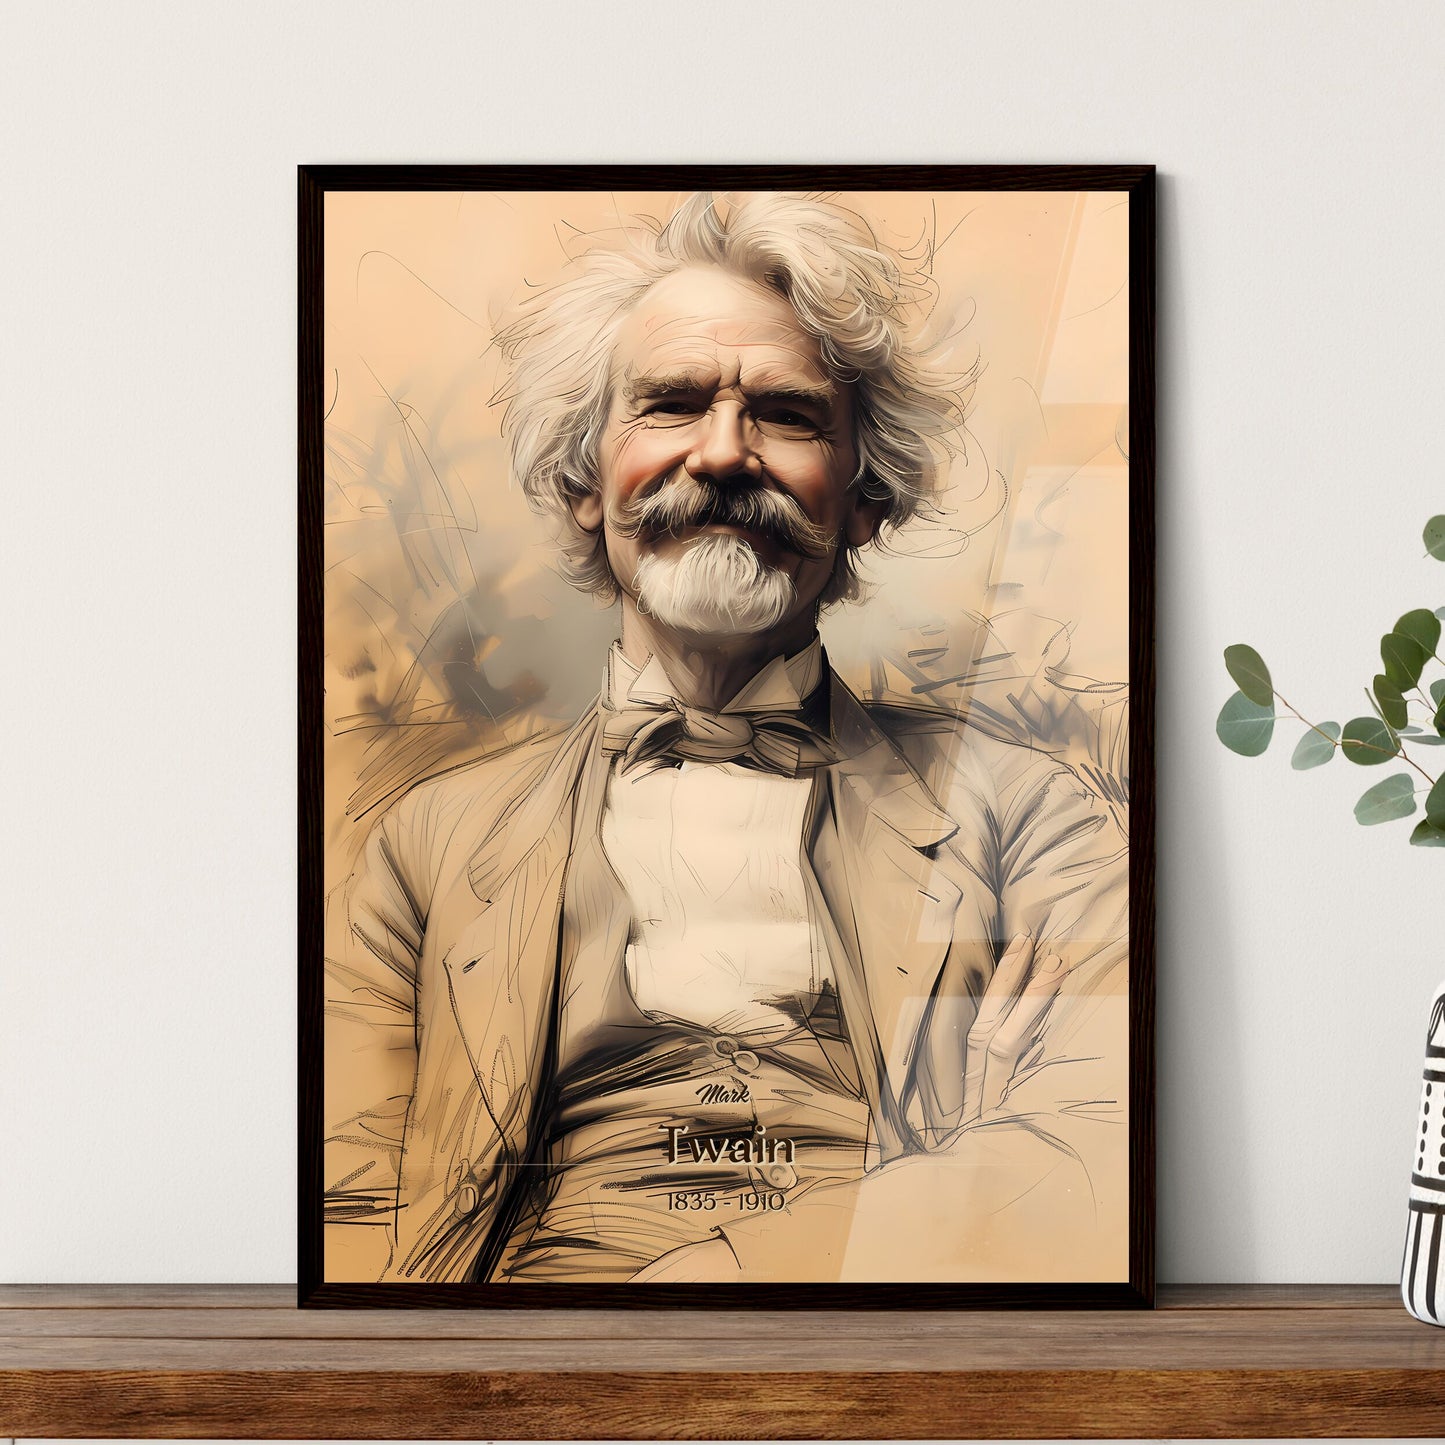 Mark, Twain, 1835 - 1910, A Poster of a man with a mustache and a bow tie Default Title